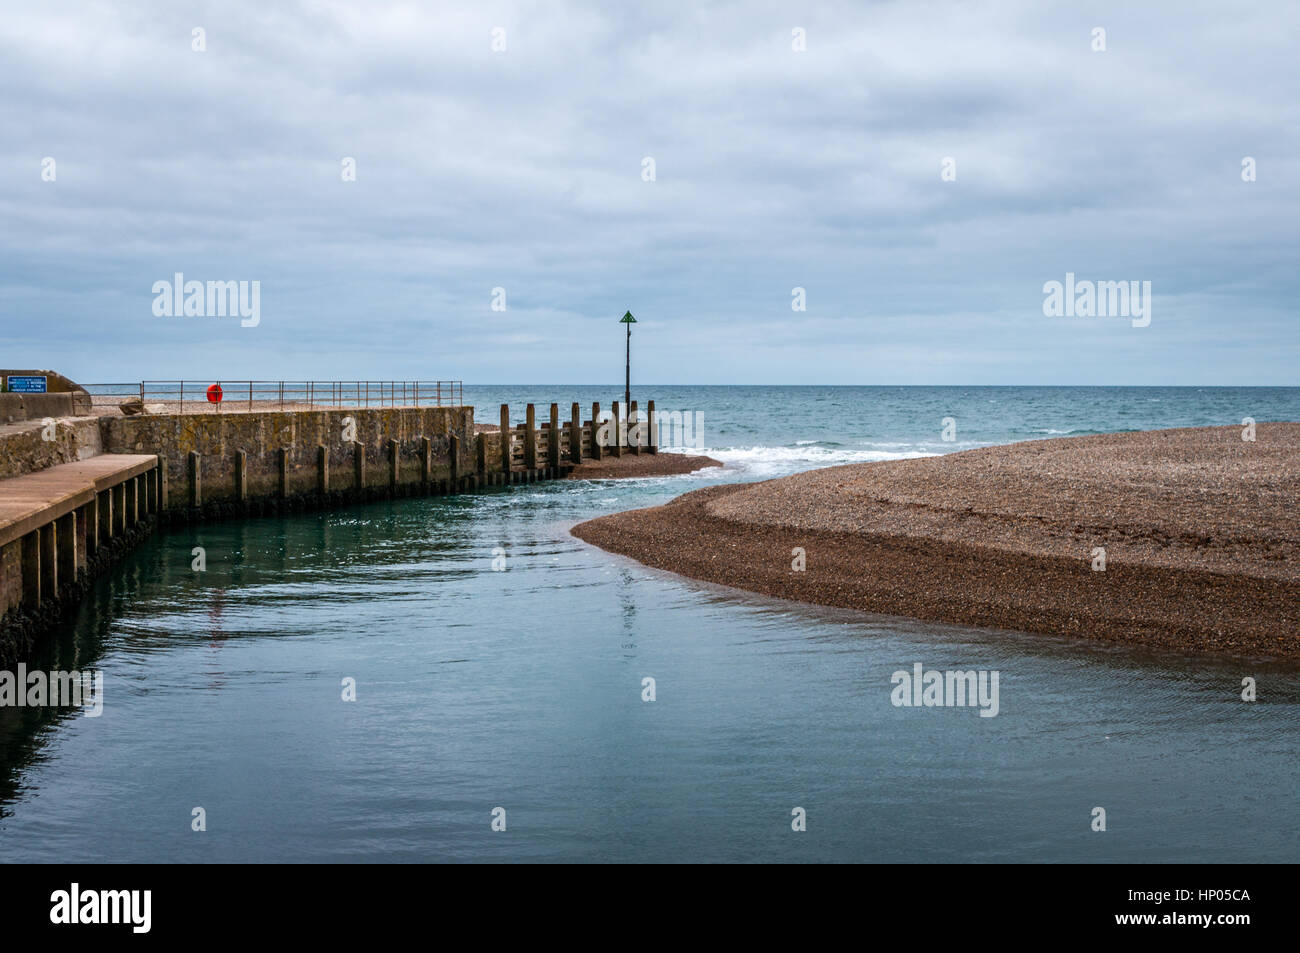 Narrow channel and sandbank where River Axe enters the sea at Axmouth harbour. Stock Photo